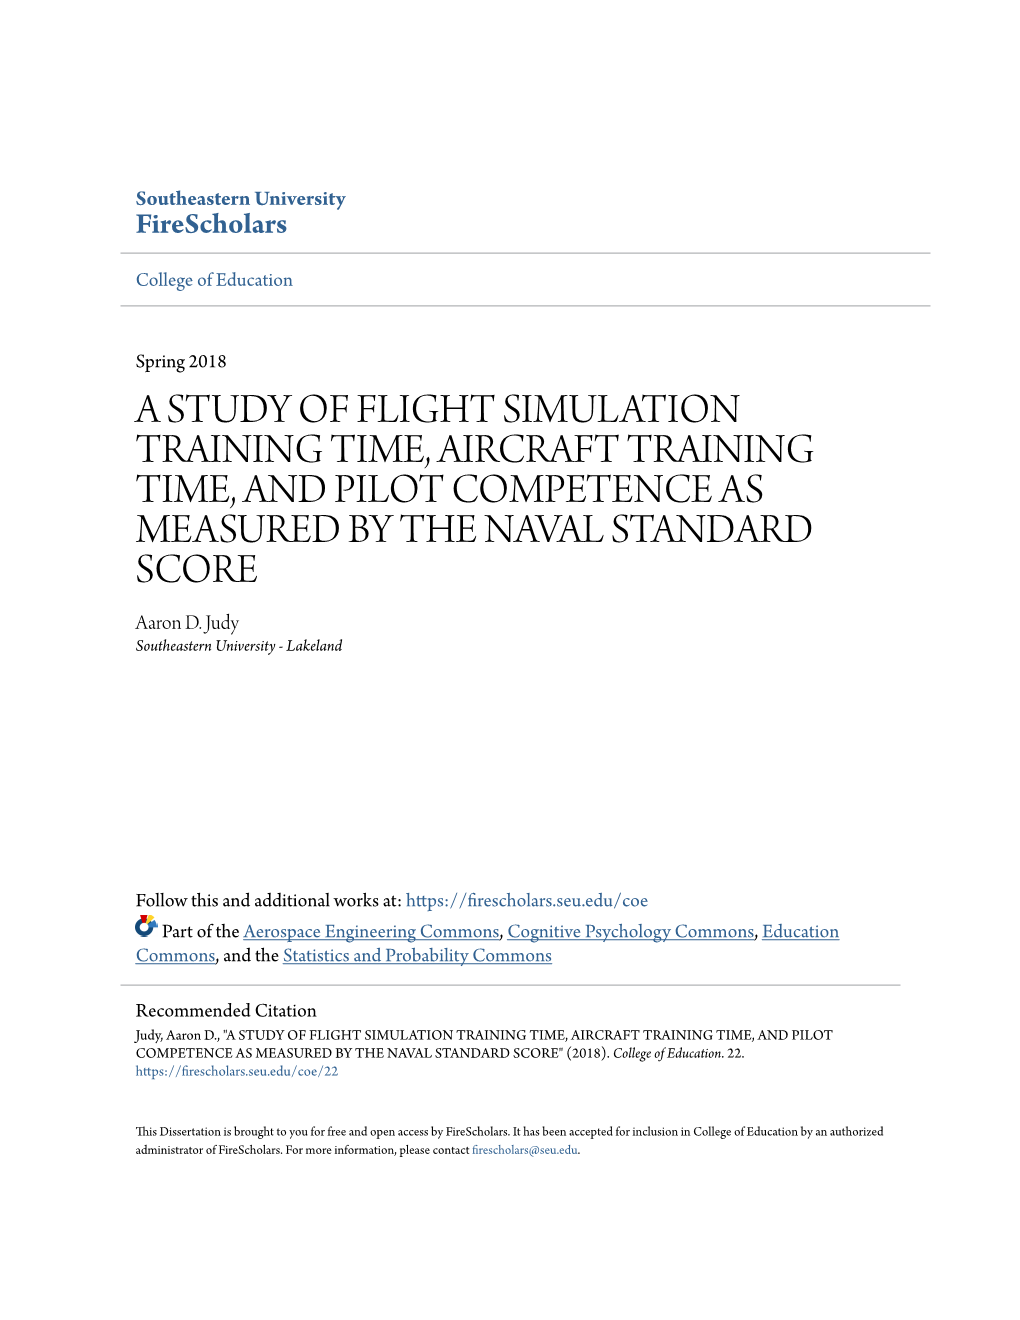 A STUDY of FLIGHT SIMULATION TRAINING TIME, AIRCRAFT TRAINING TIME, and PILOT COMPETENCE AS MEASURED by the NAVAL STANDARD SCORE Aaron D